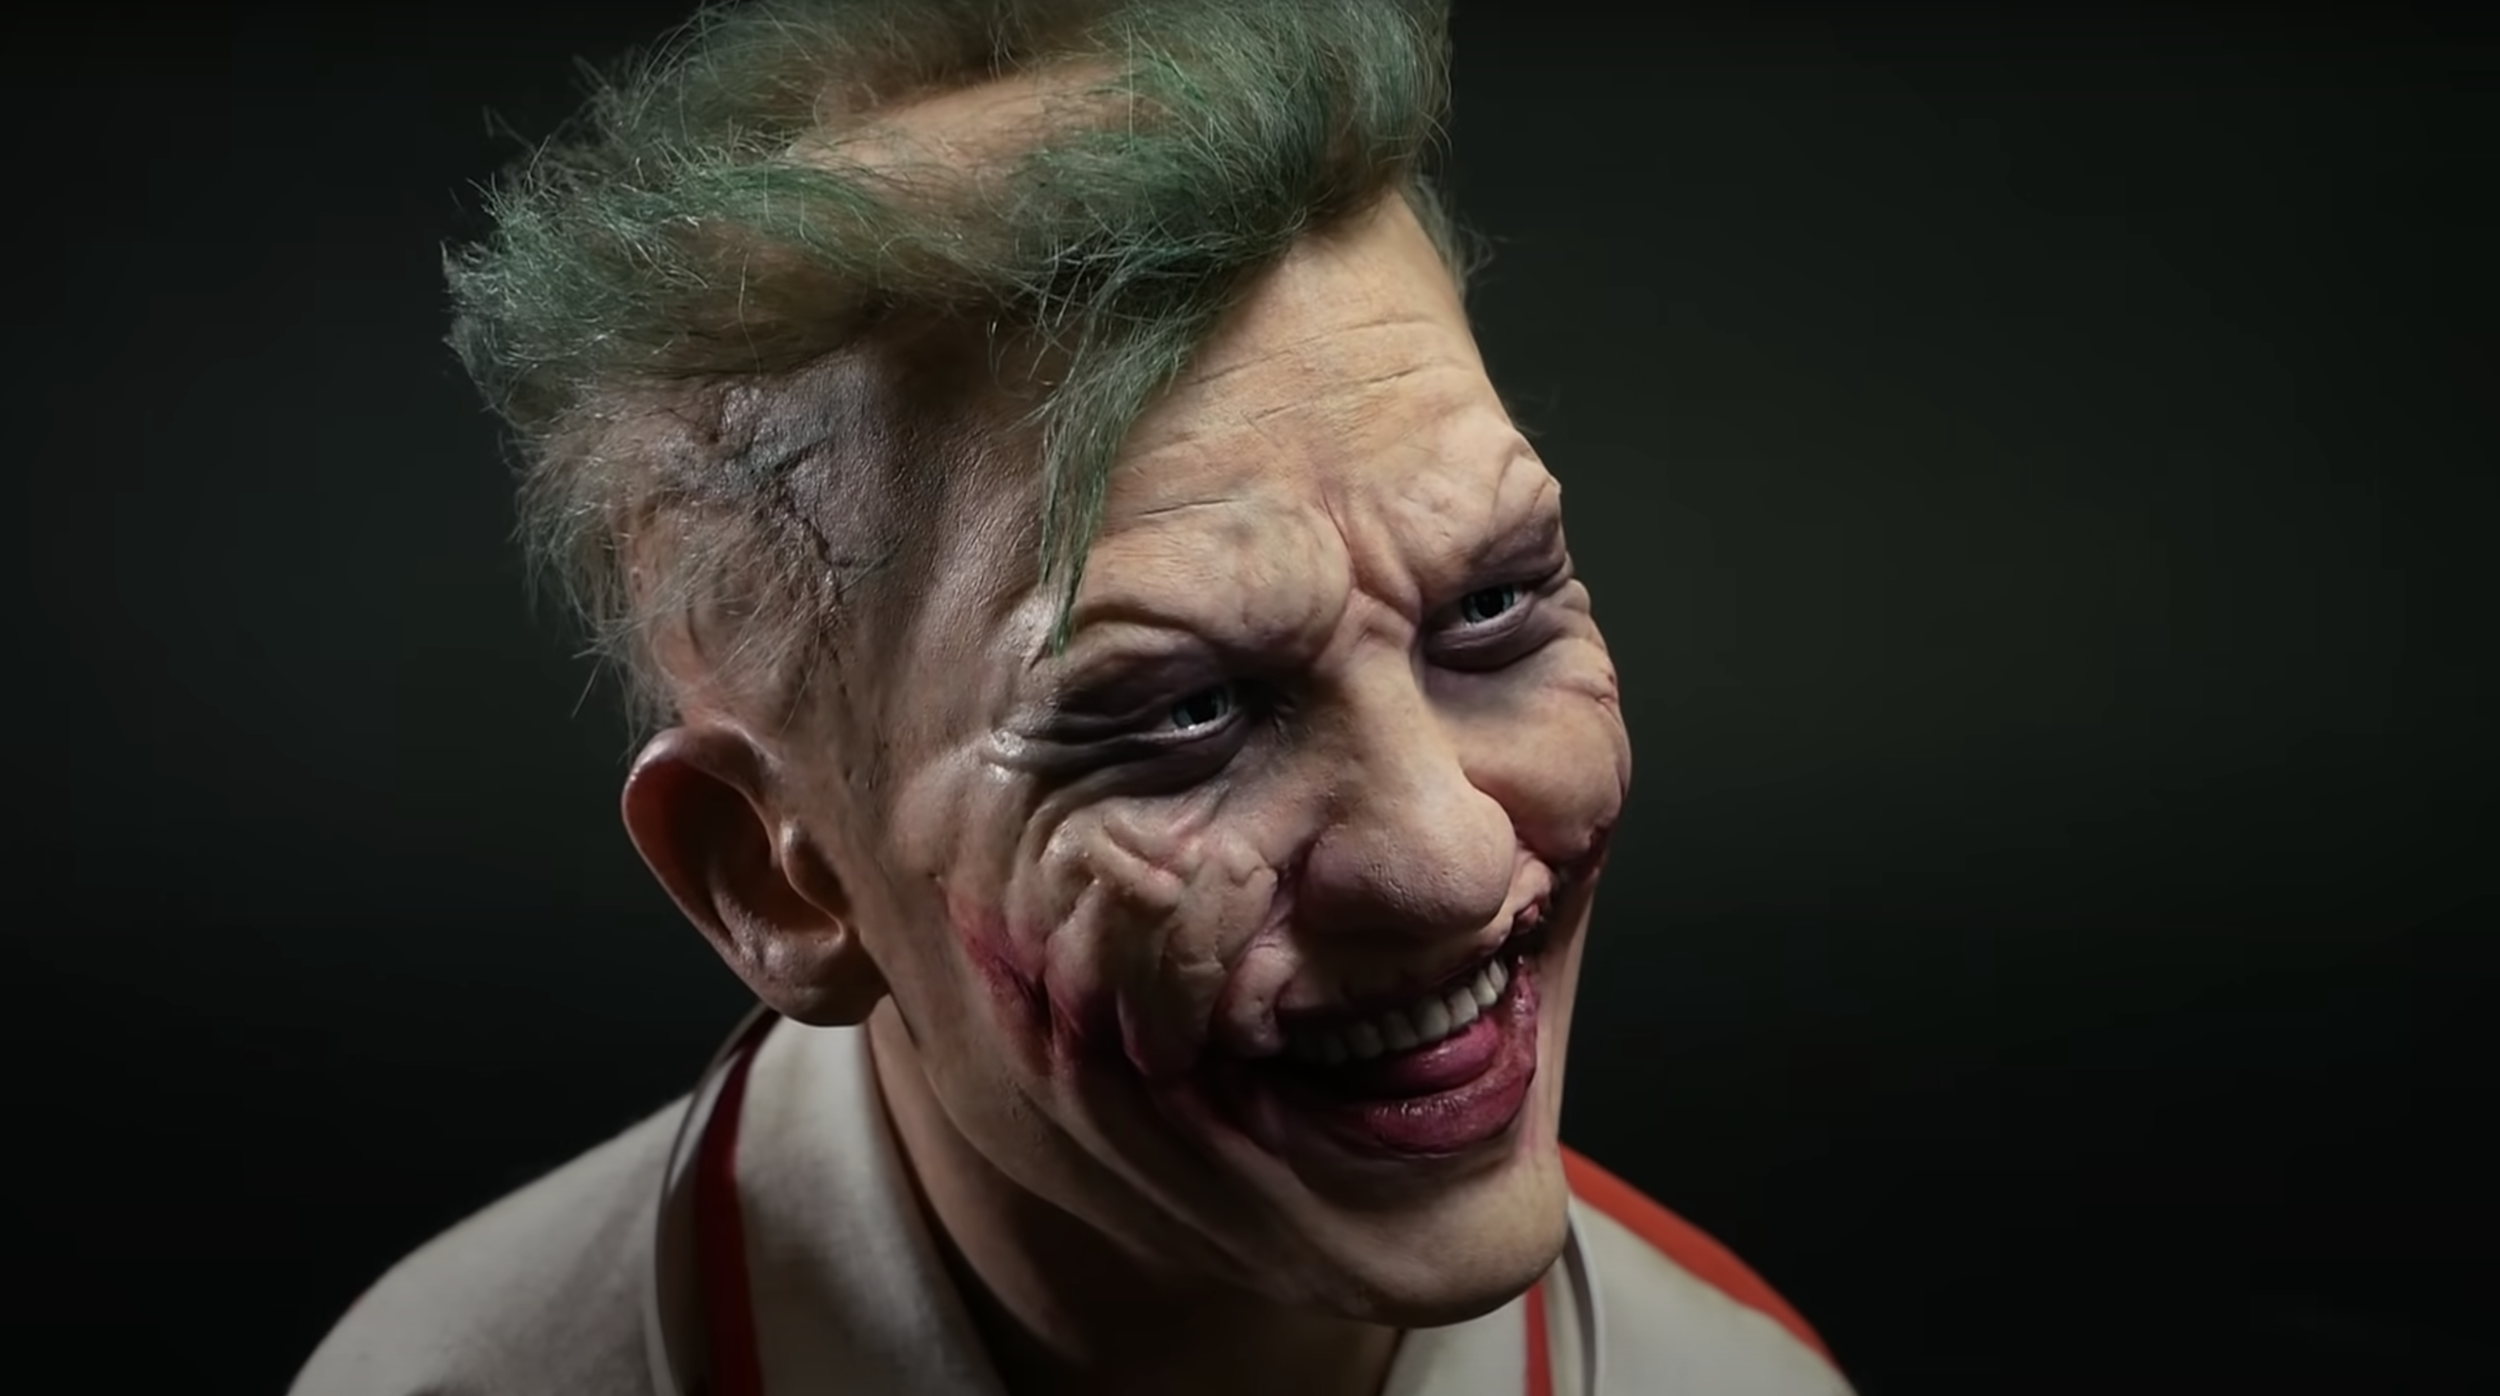 Time Lapse Video Features The Creation of a Sculpture Based on The Joker  From THE BATMAN — GeekTyrant